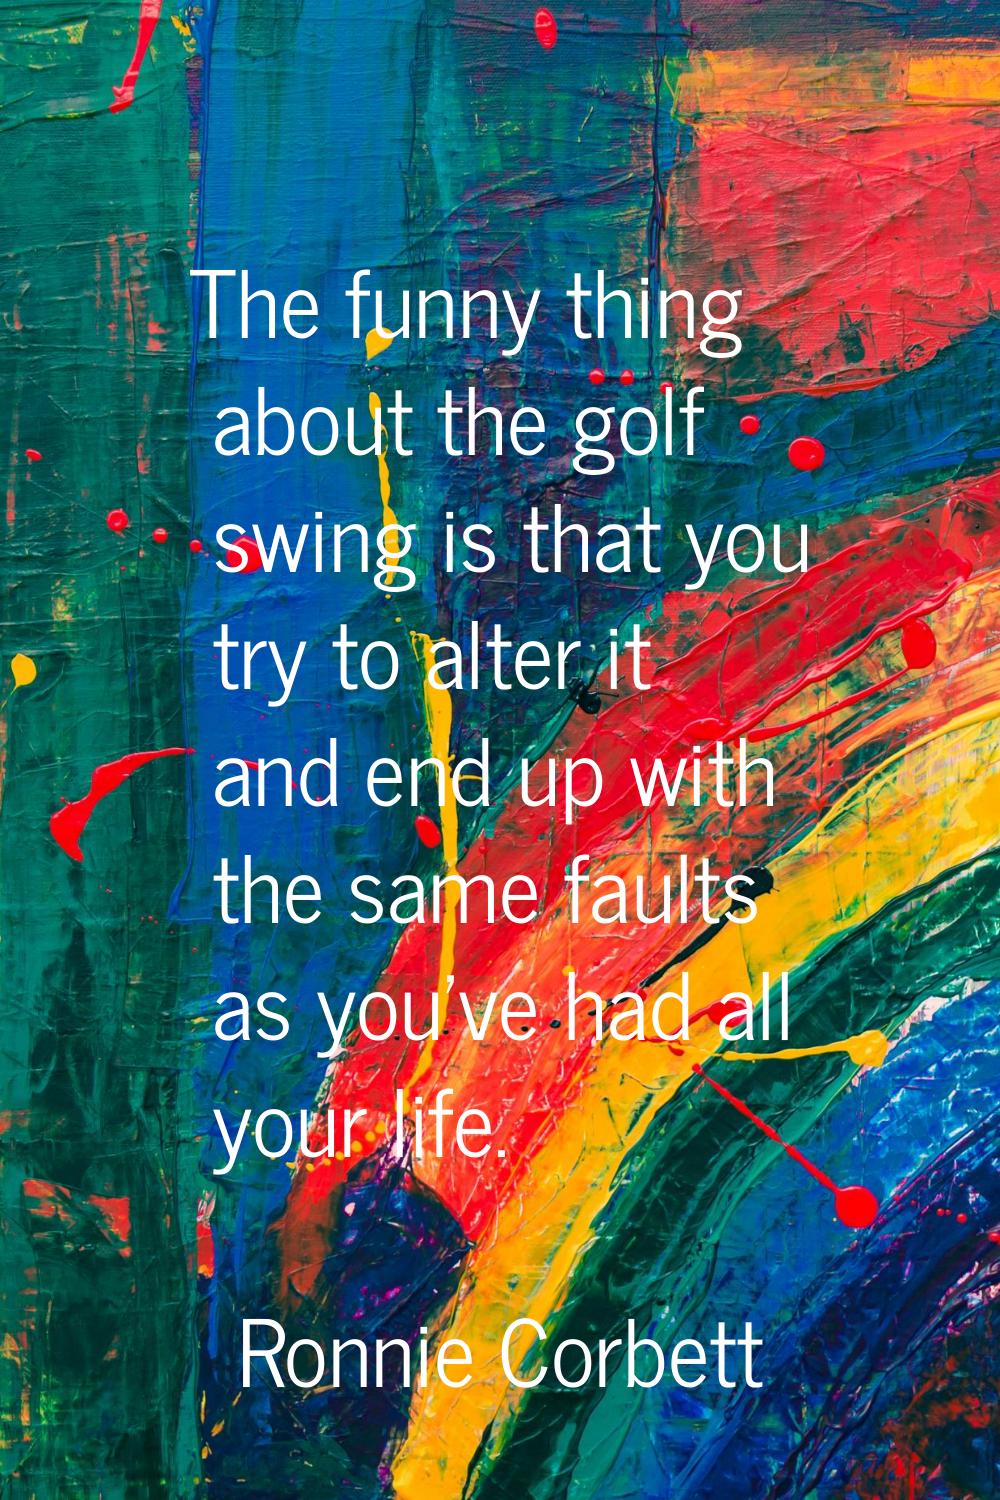 The funny thing about the golf swing is that you try to alter it and end up with the same faults as